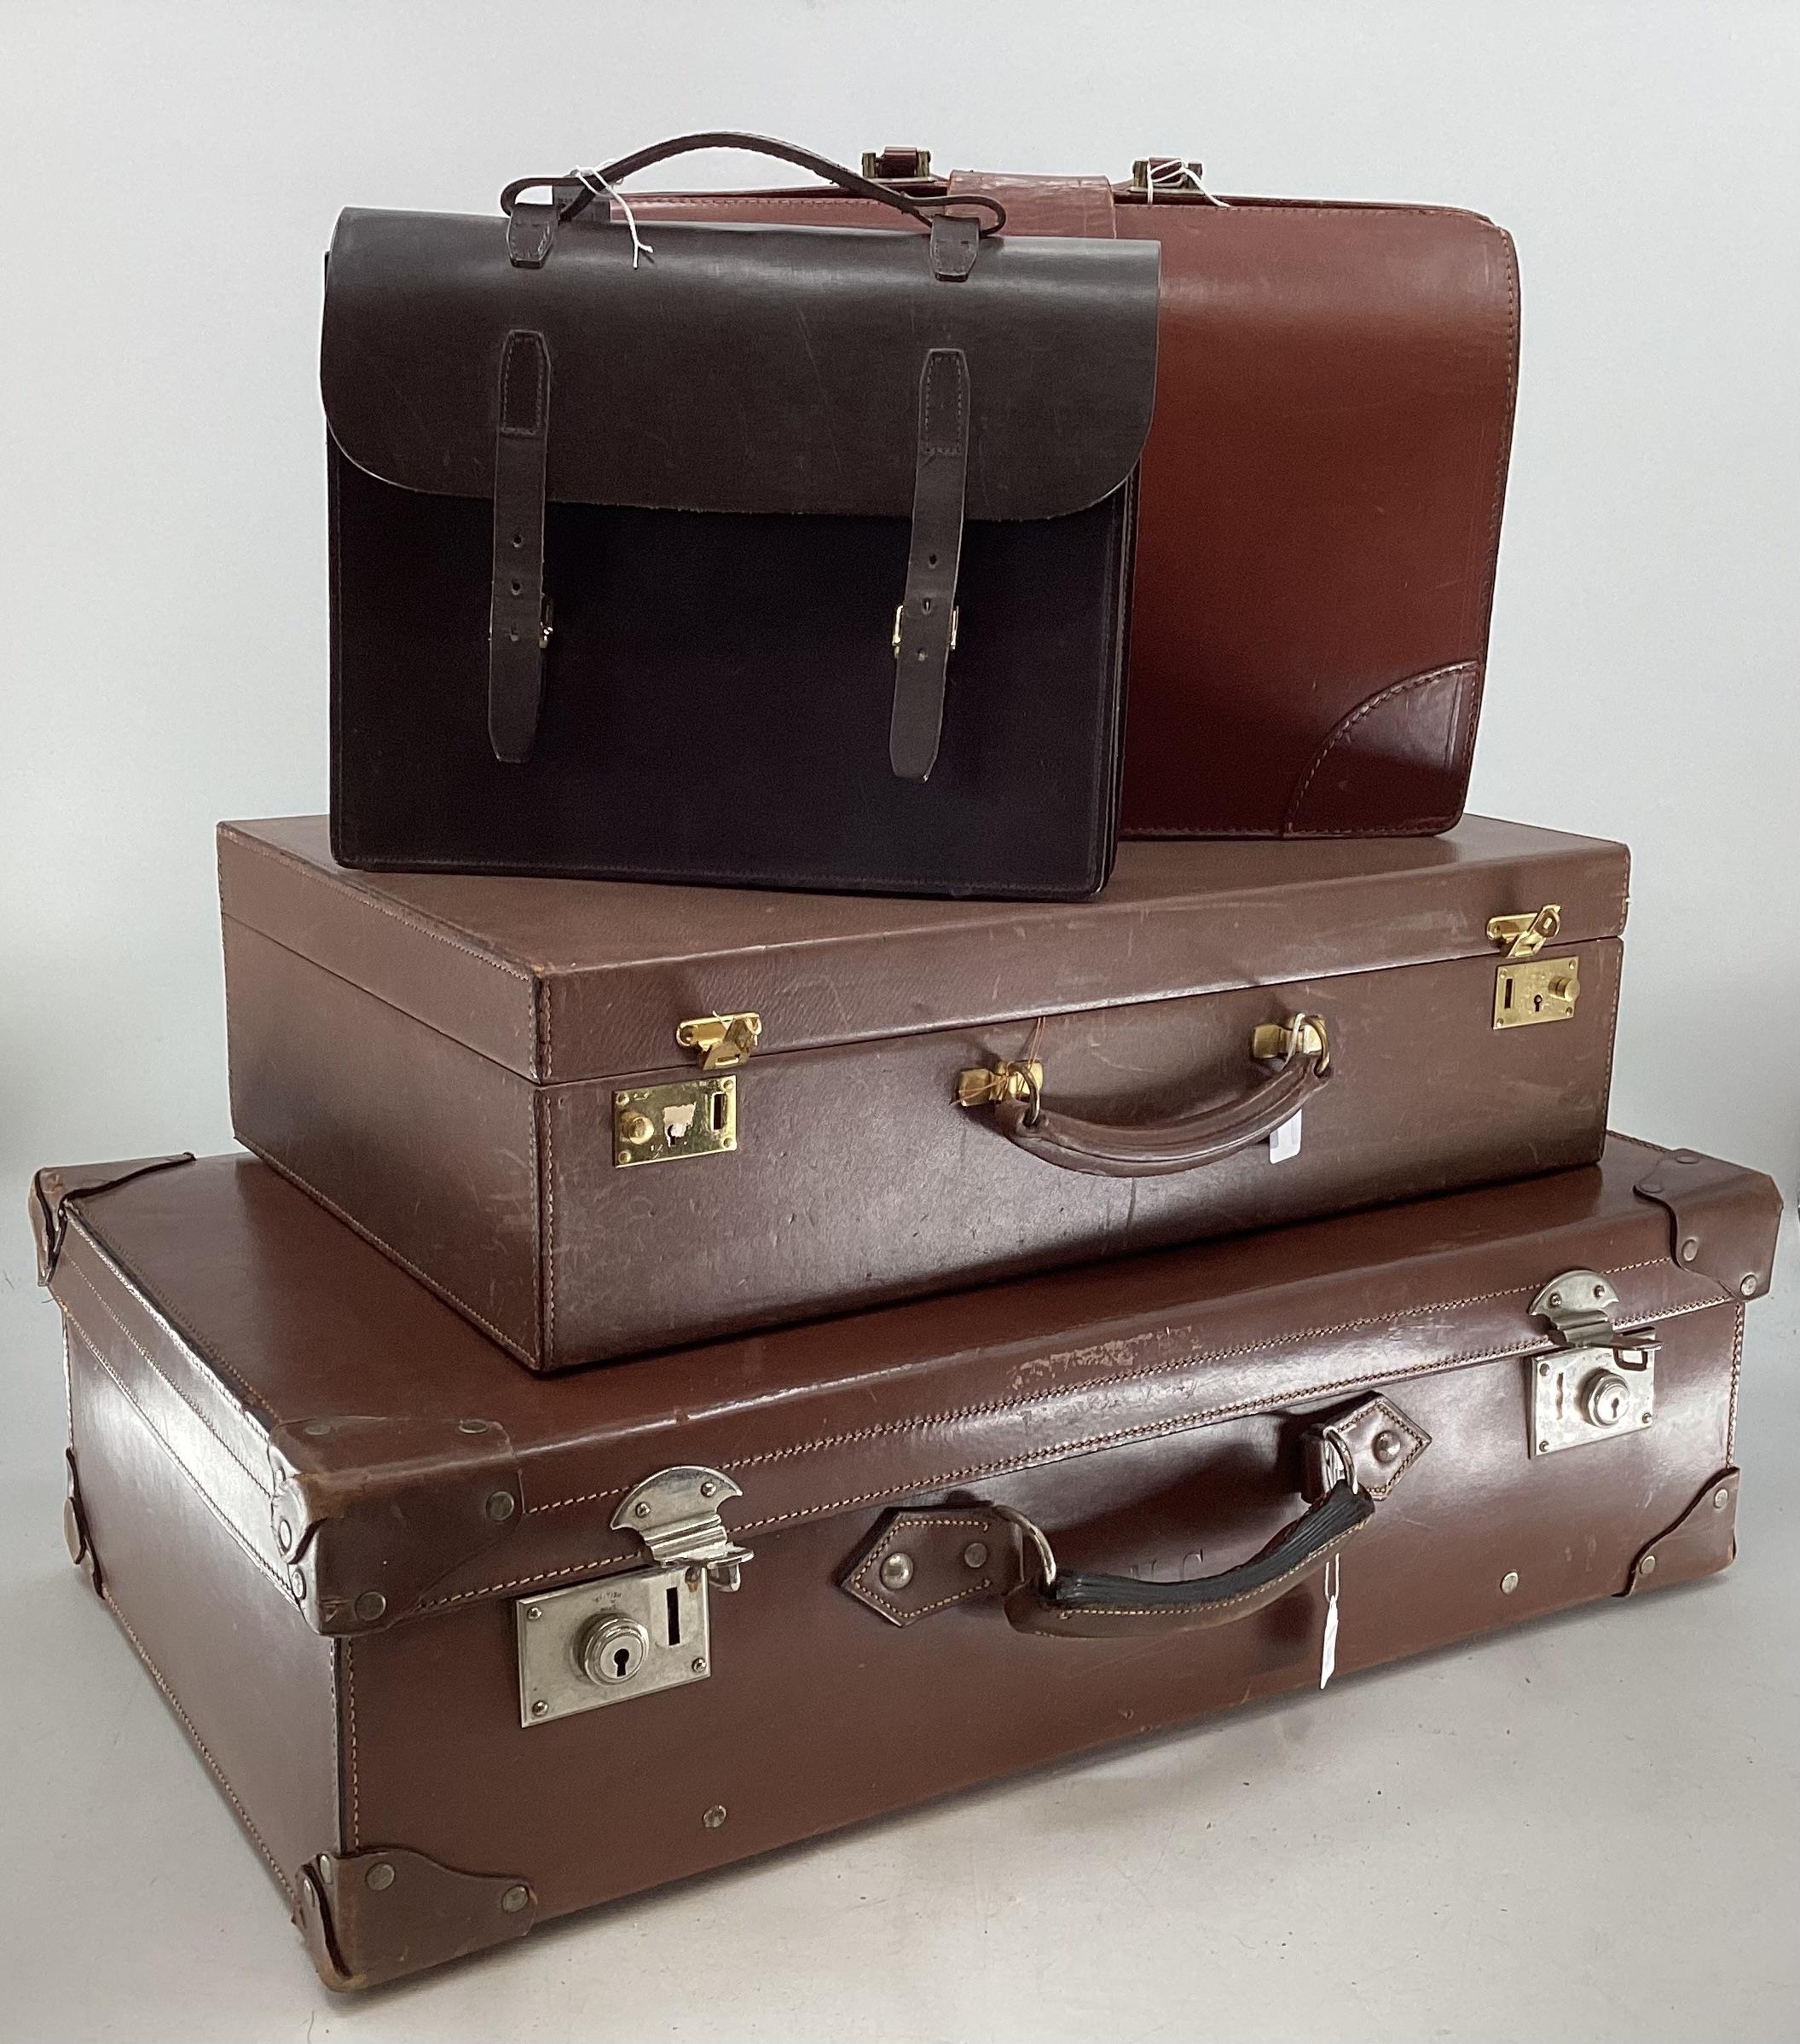 Vintage brown leather suitcase, brown leather vanity suitcase with fitted interior, a brown